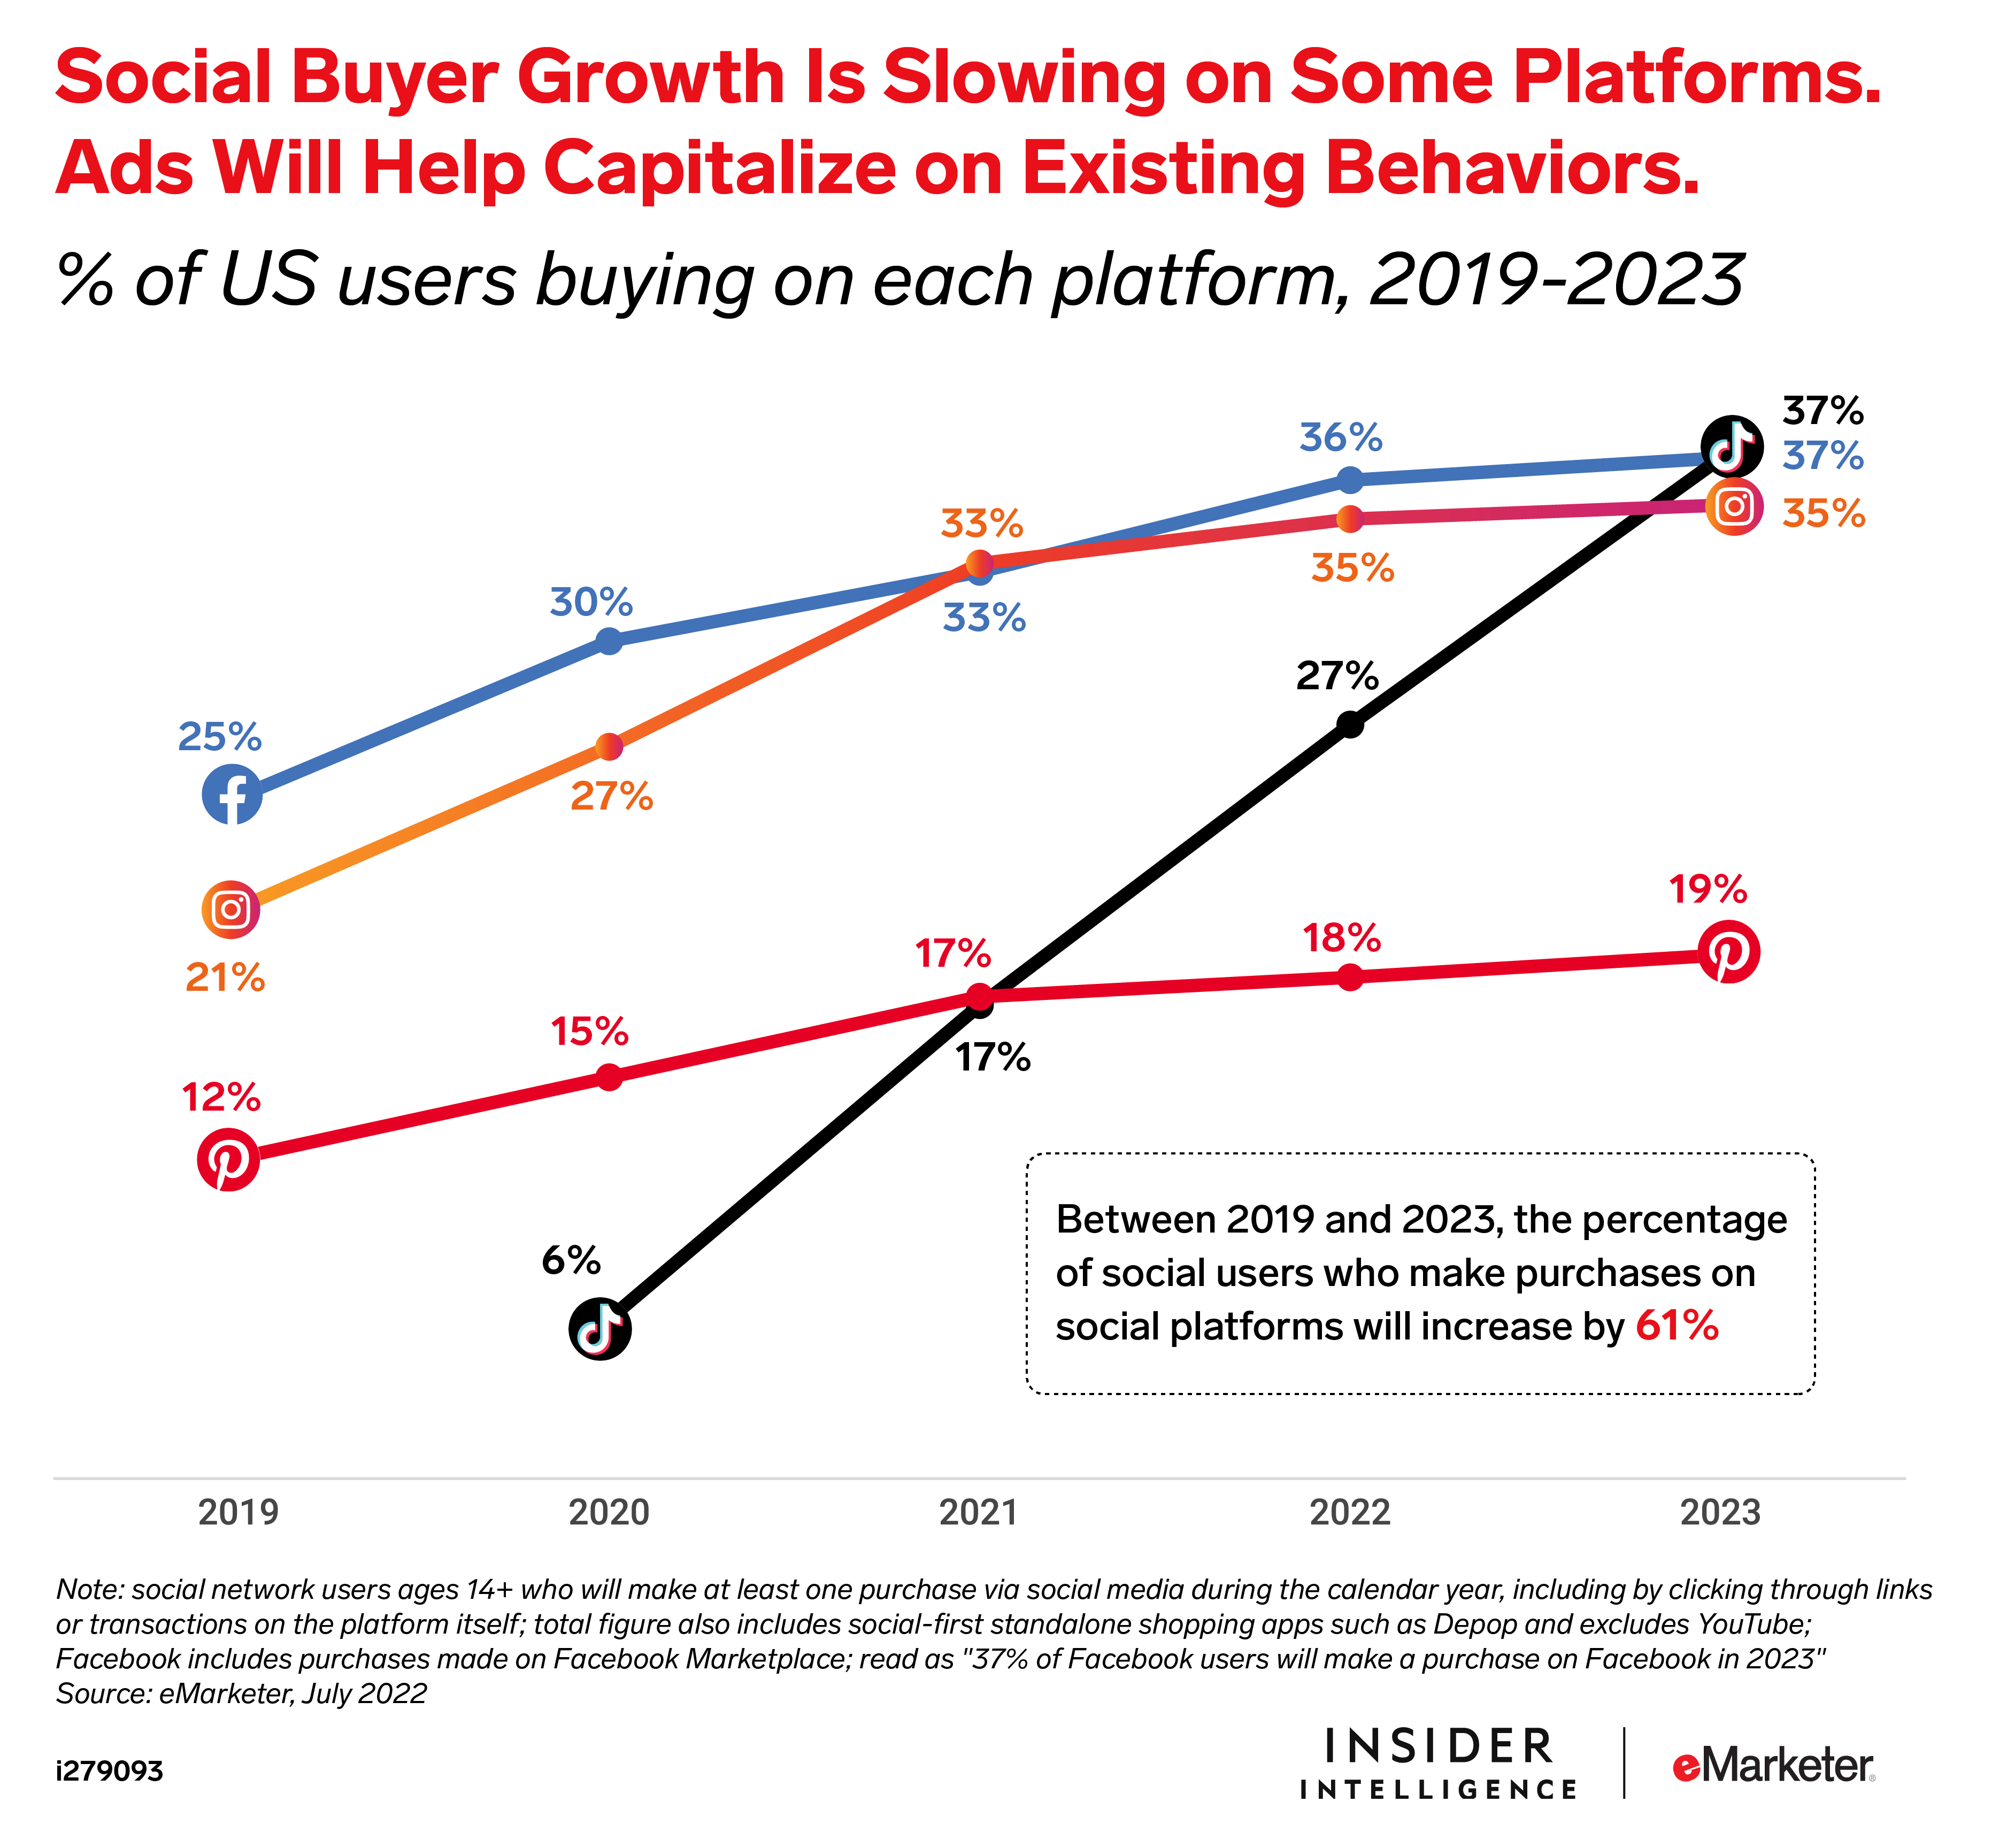 Social Buyer Growth Is Slowing on Some Platforms.Ads Will Help Capitalize on Existing Behaviors, 2019-2023 (% of US users buying on each platform)